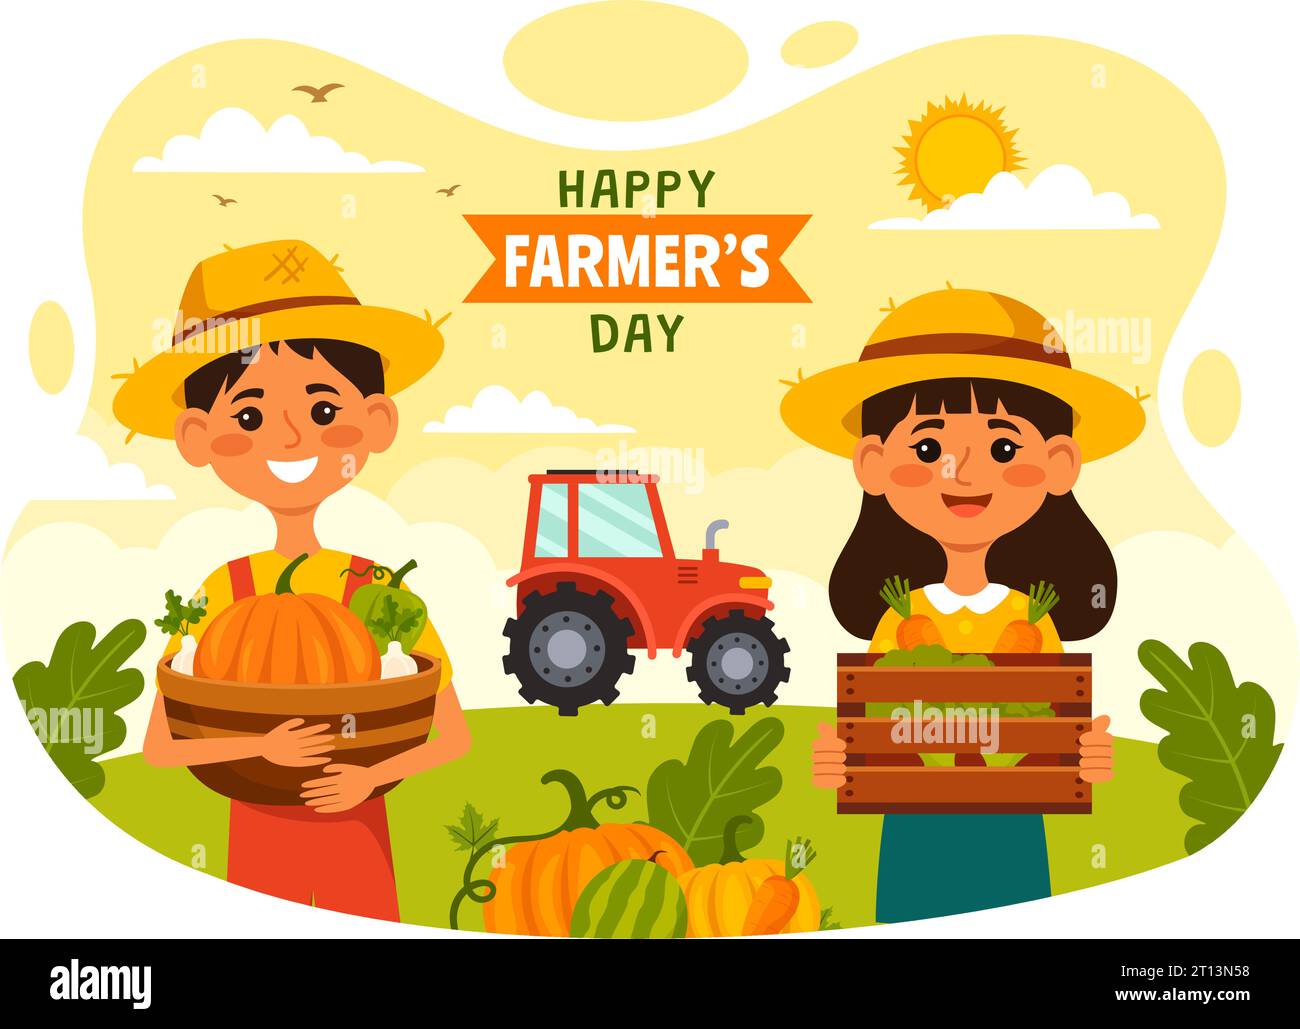 Happy Farmers' Day Vector Illustration on December 23 Rice Fields and Farmers Suitable for Poster or Landing Page in Flat Cartoon Background Design Stock Vector